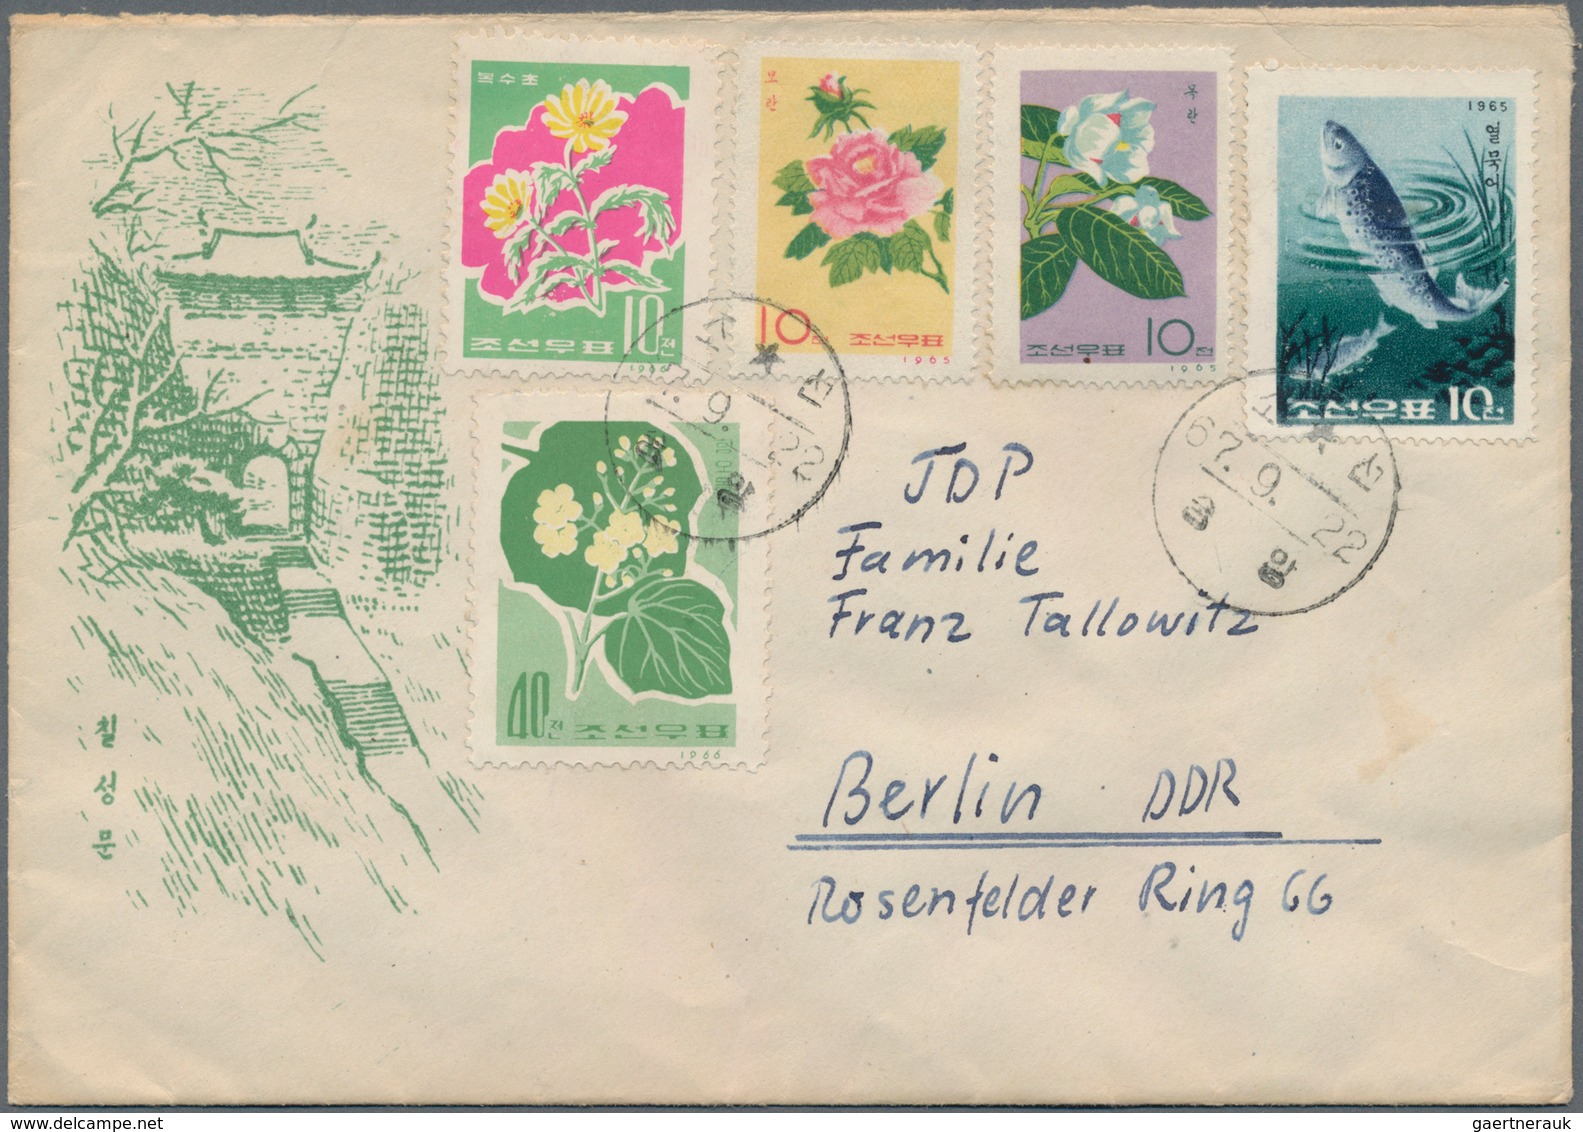 Korea-Nord: 1972,1977, Illustrated Cover With Different Stamps From The GDR Embassy To Berlin And A - Korea, North